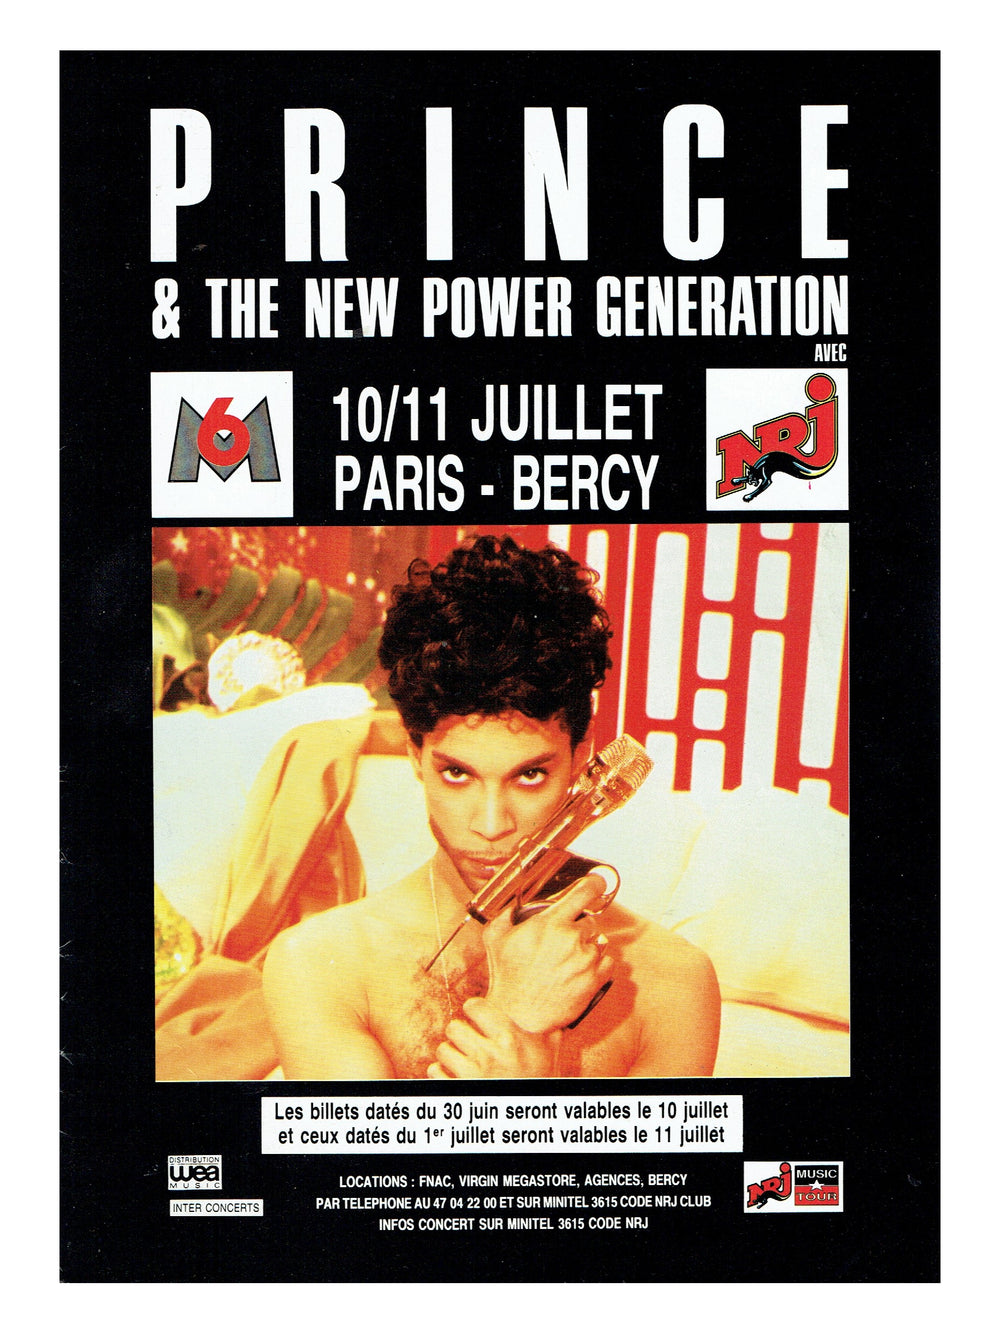 Prince – & The New Power Generation – Diamonds& Pearls Tour Paris Bercy July 10/11 Official Advert Preloved: 1992